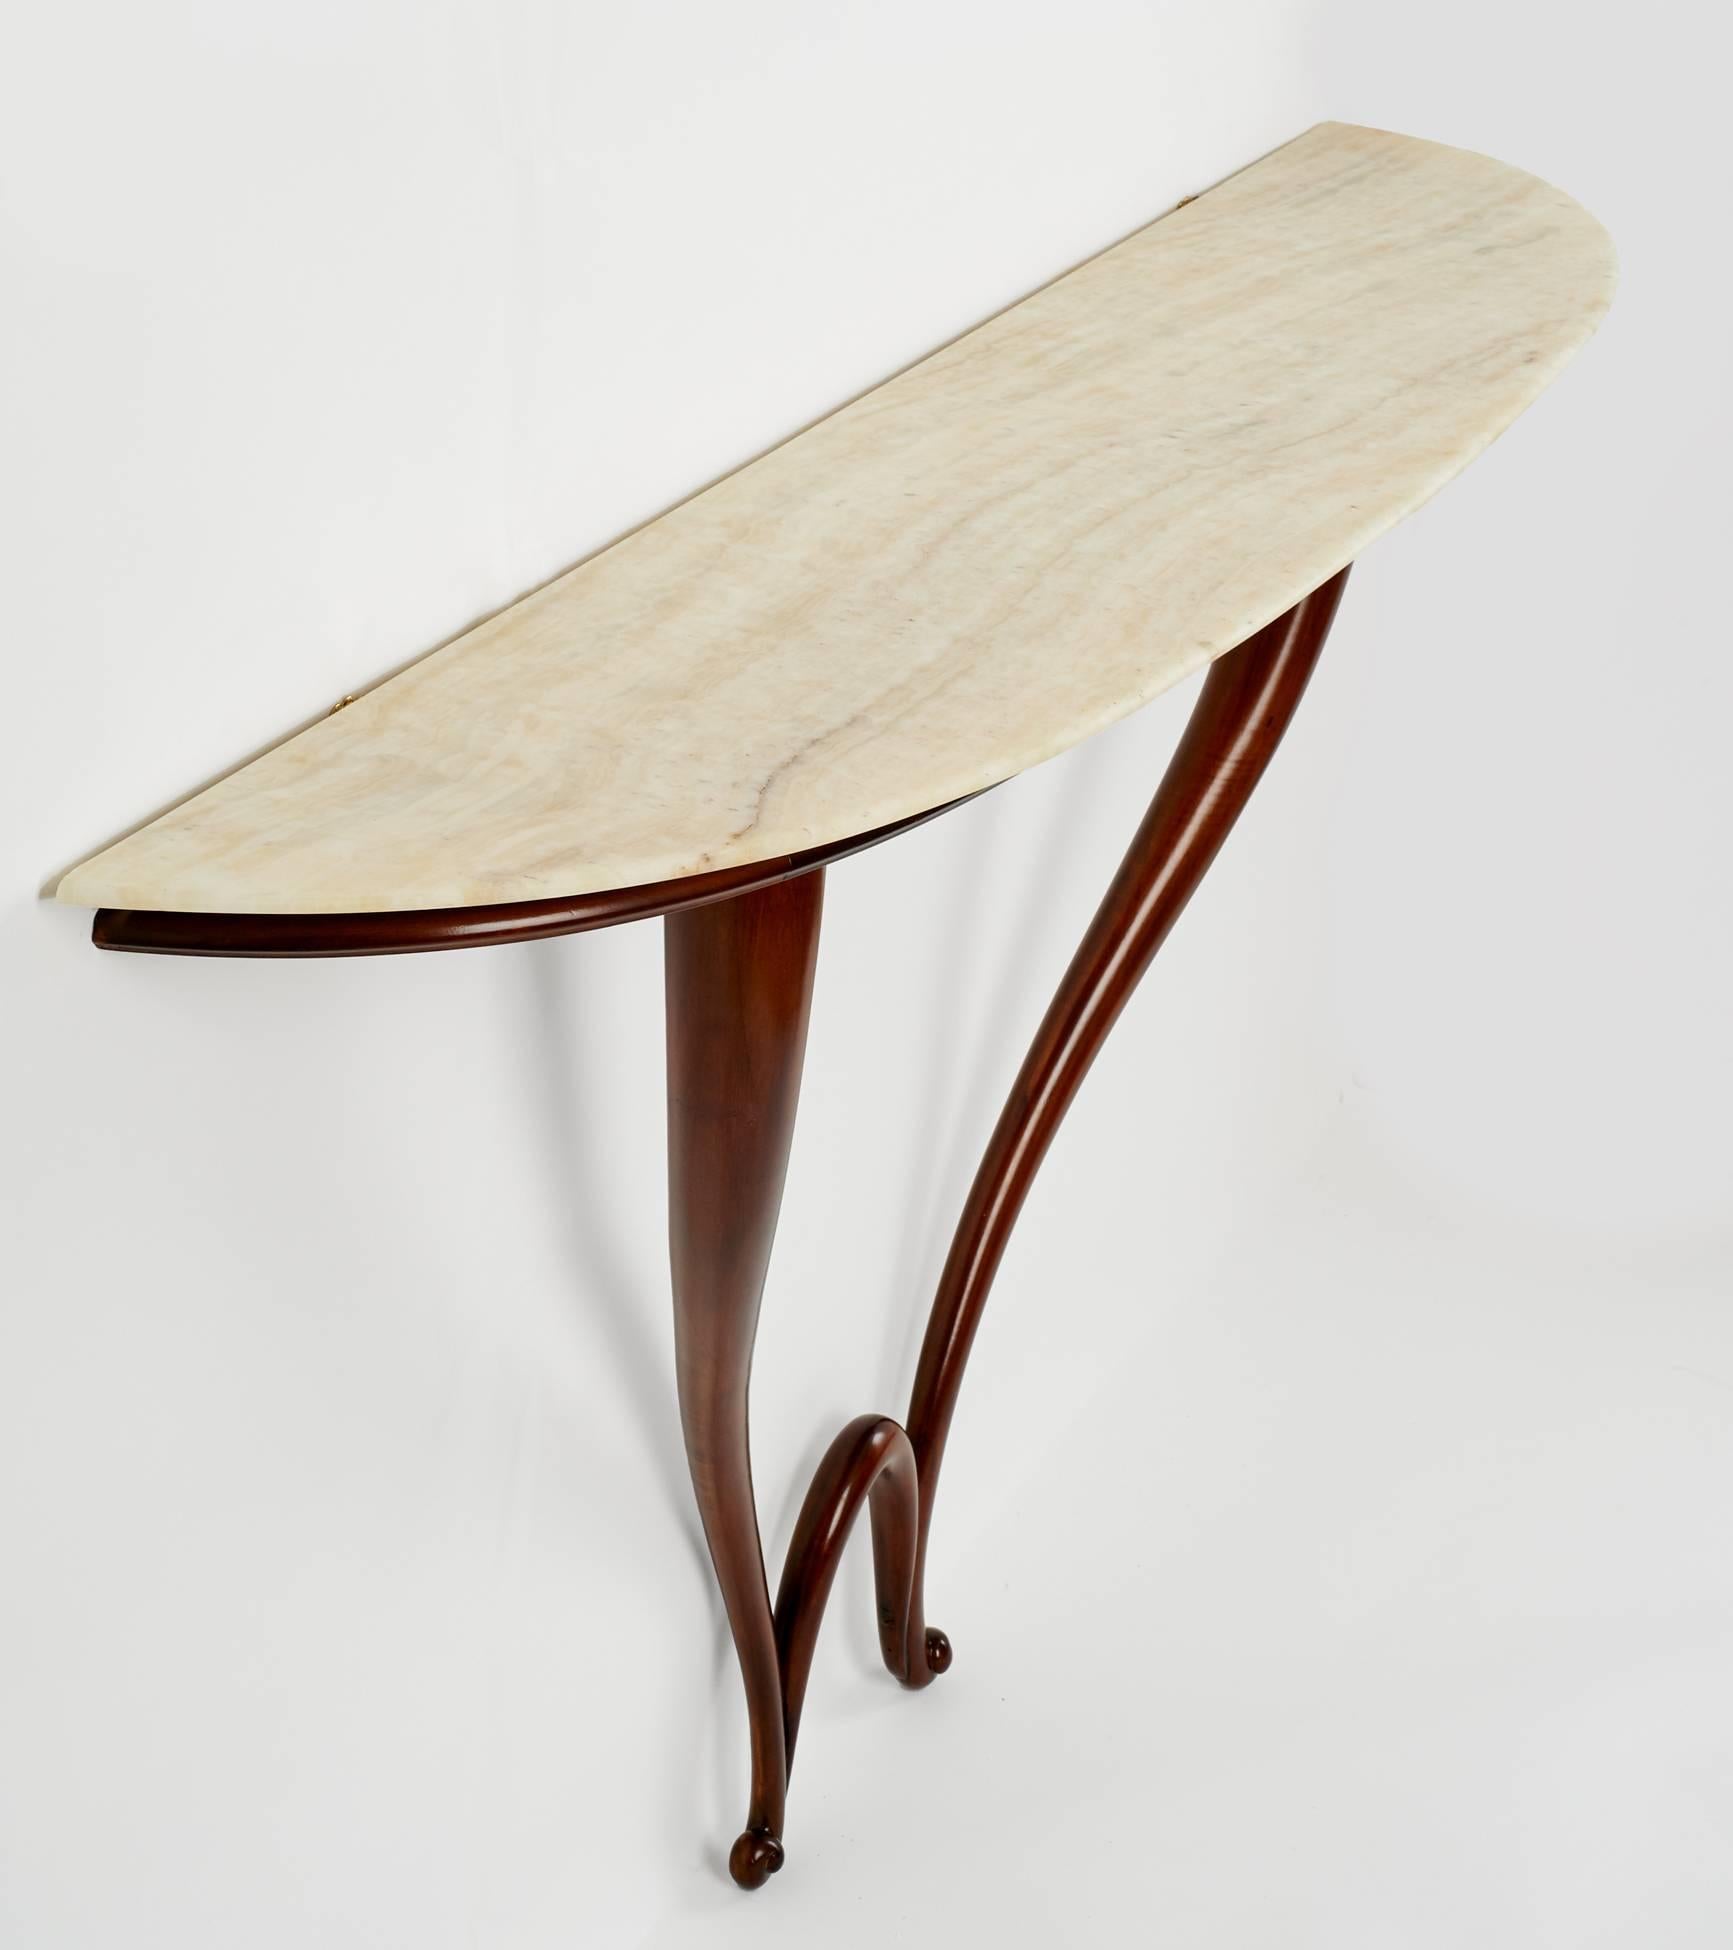 Italian Sculptural White Marble and Curved Mahogany Console ITSO Gio Ponti, Italy 1950's